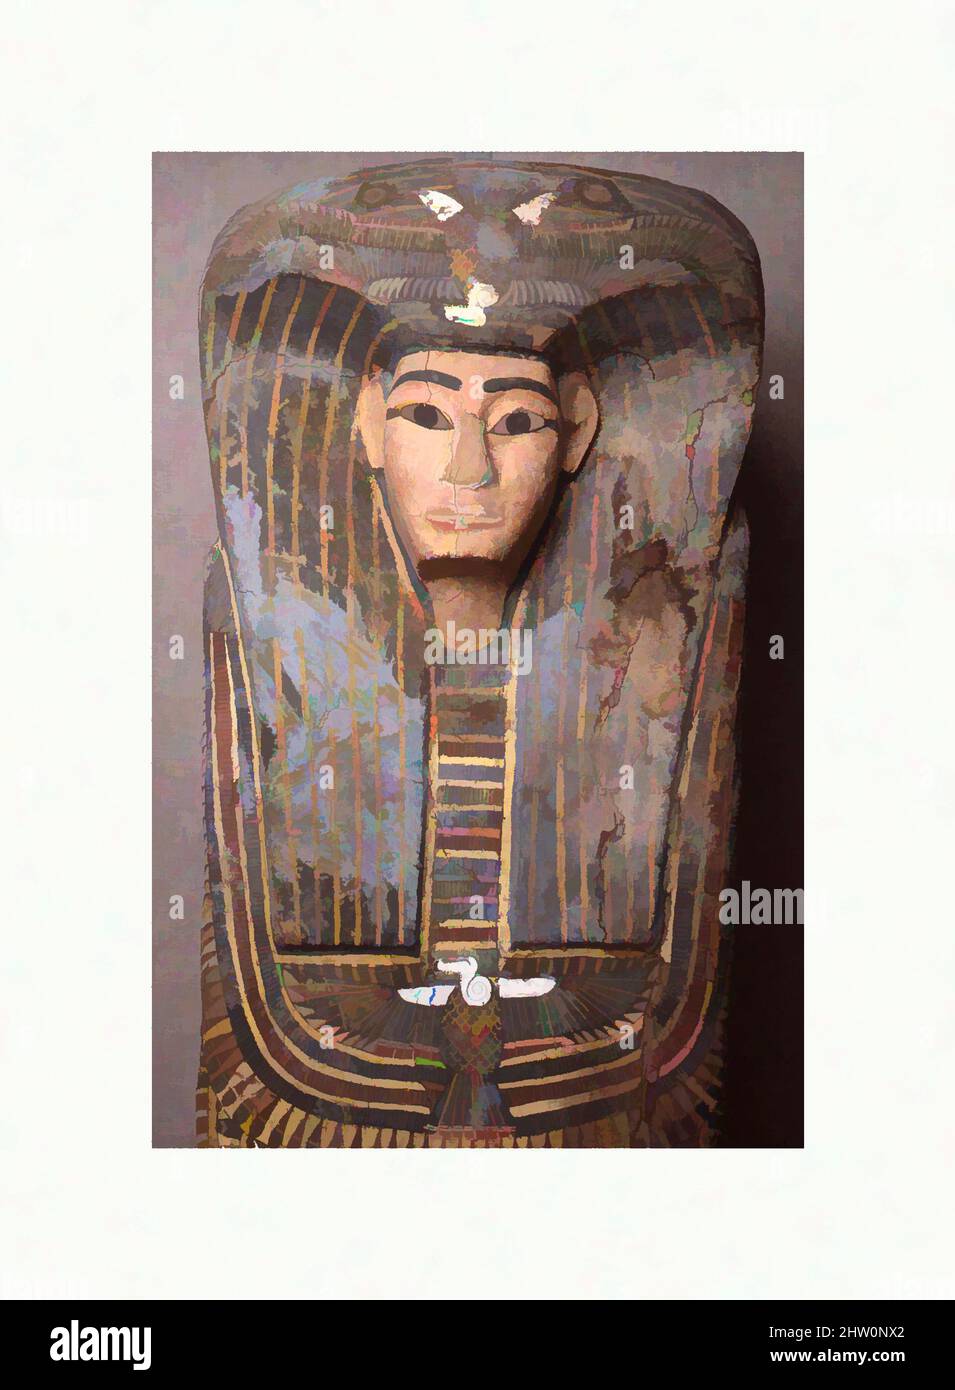 Art inspired by Rishi coffin of Puhorsenbu, Second Intermediate Period–Early New Kingdom, Dynasty 17–18, ca. 1580–1479 B.C., From Egypt, Upper Egypt, Thebes, Asasif, Burial B 44, East of Pabasa, 1918–19, Sycomore wood, stucco, paint, L. 195 cm (76 3/4 in.); W. 48 cm (18 7/8 in.); H. 74, Classic works modernized by Artotop with a splash of modernity. Shapes, color and value, eye-catching visual impact on art. Emotions through freedom of artworks in a contemporary way. A timeless message pursuing a wildly creative new direction. Artists turning to the digital medium and creating the Artotop NFT Stock Photo